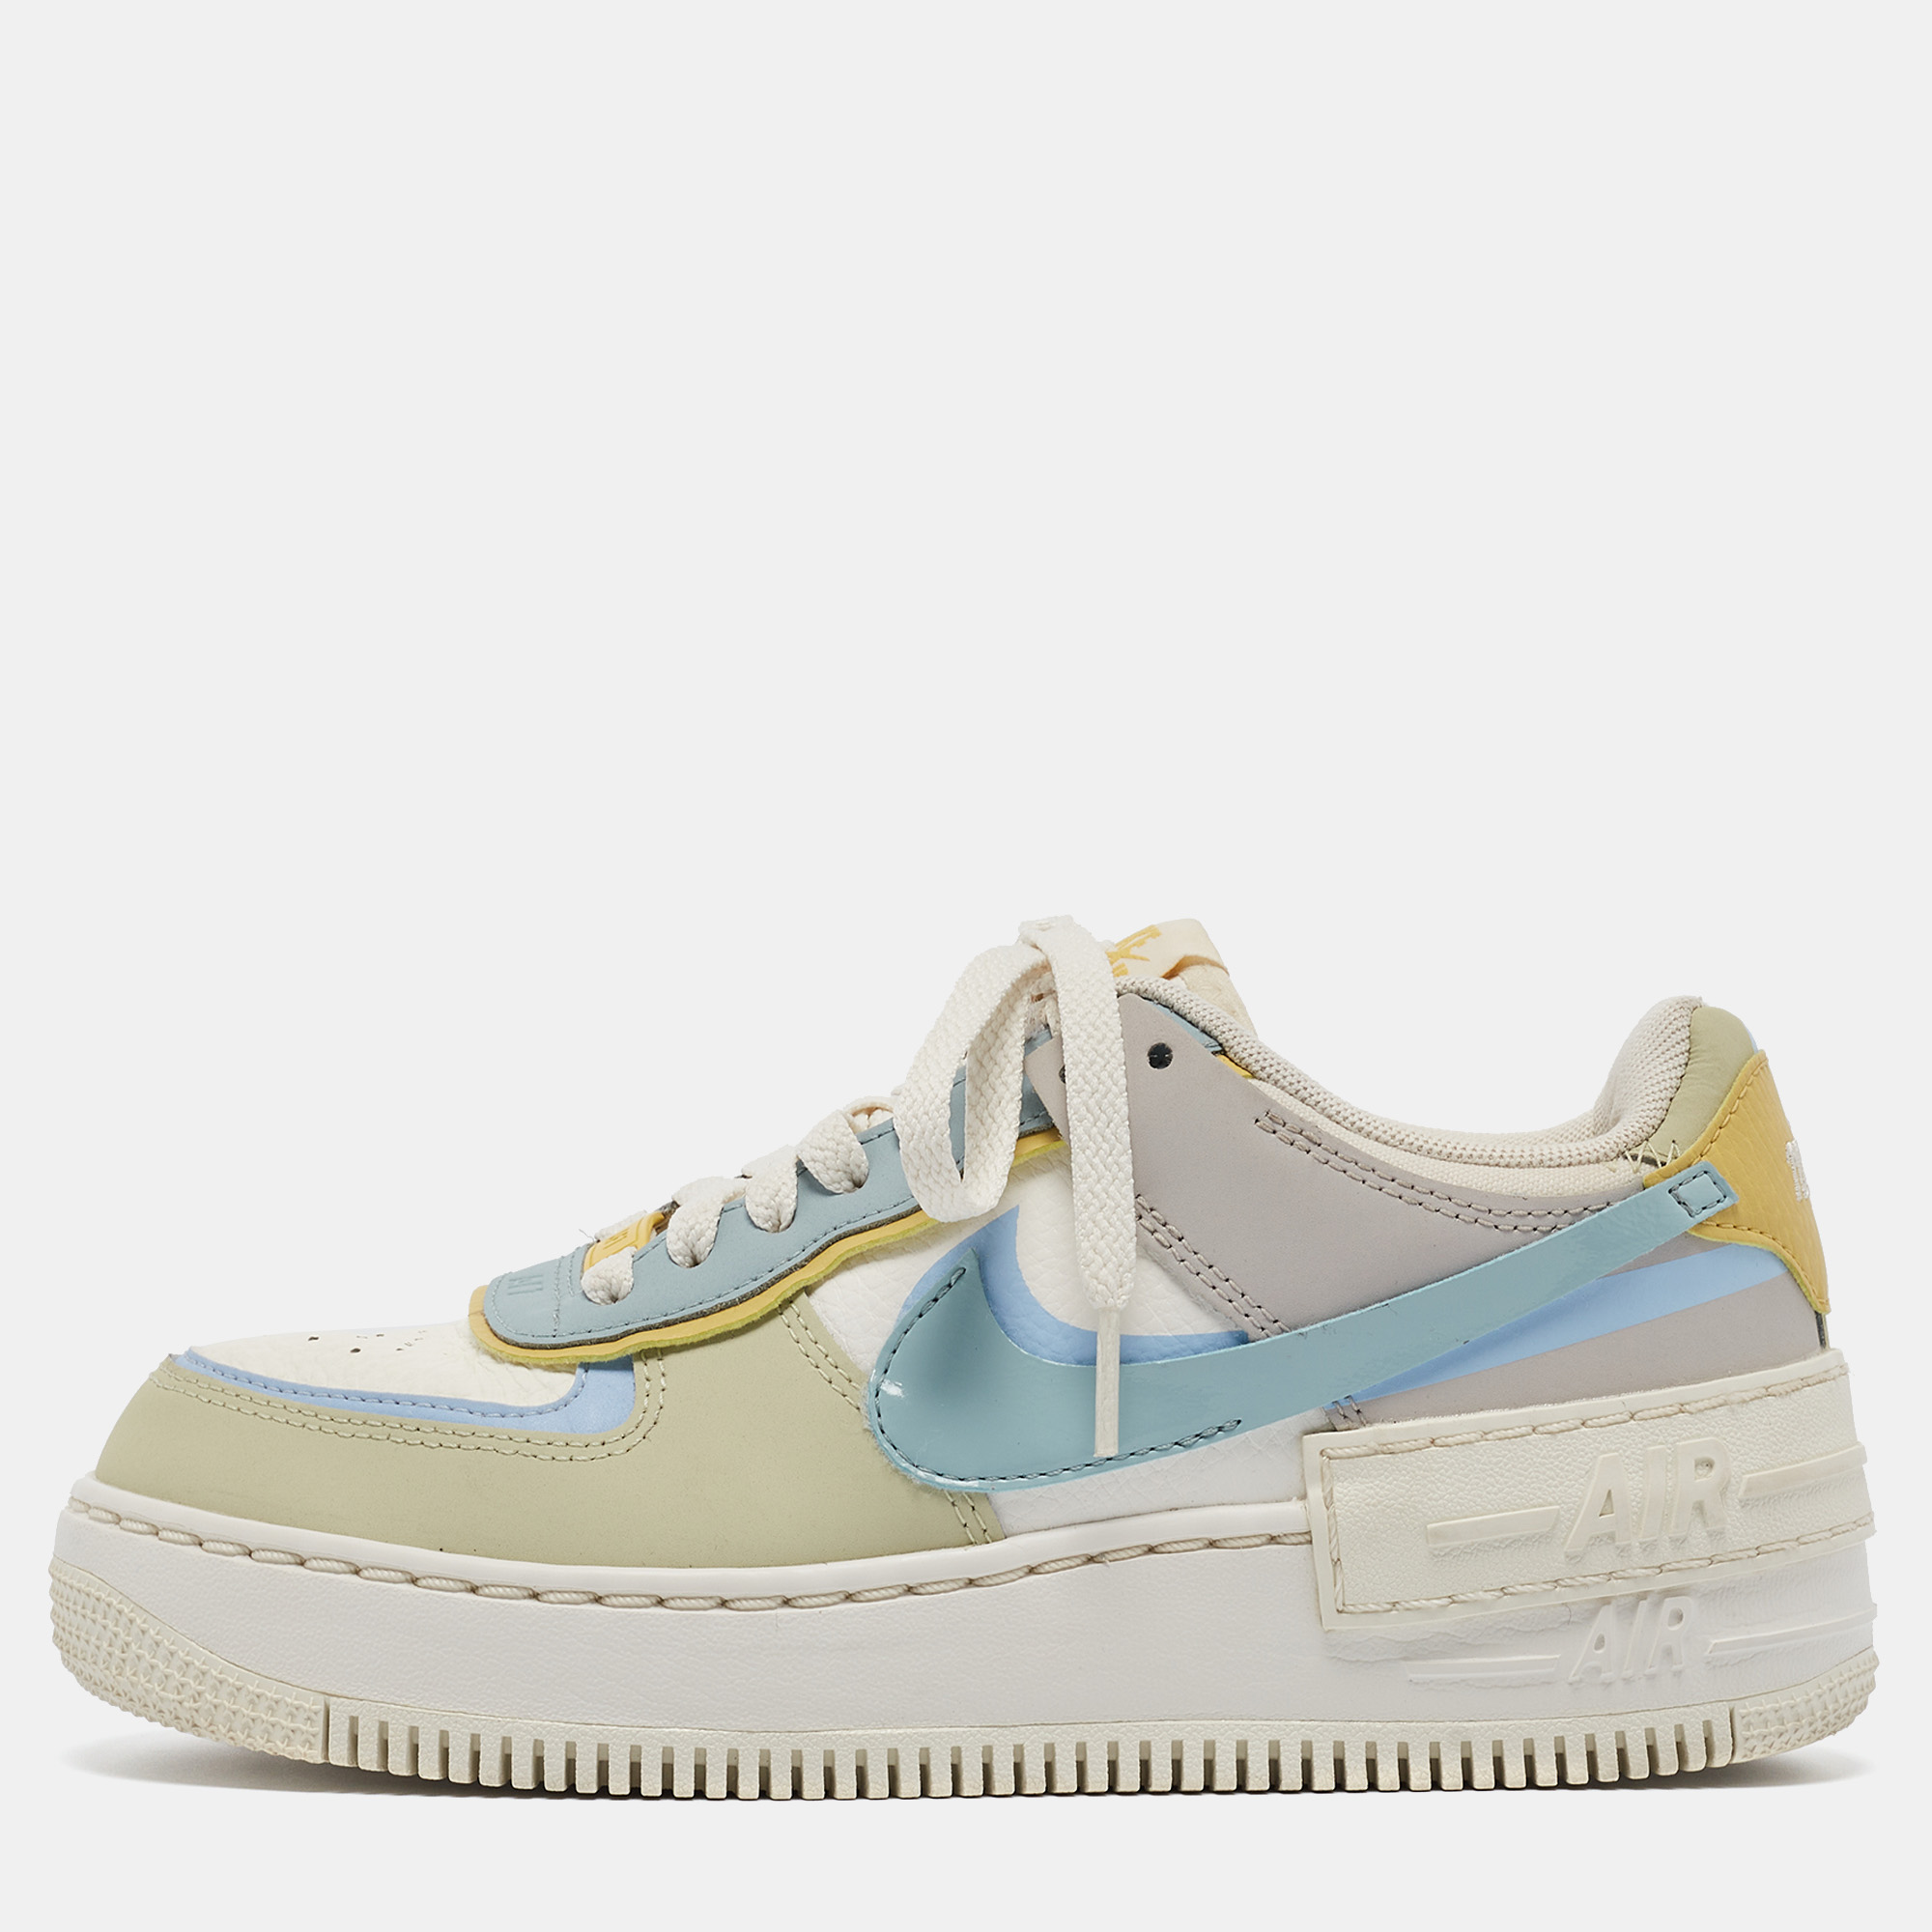 

Nike Multicolor Leather Air Force 1 Low Shadow Ocean Cube Sneakers Size